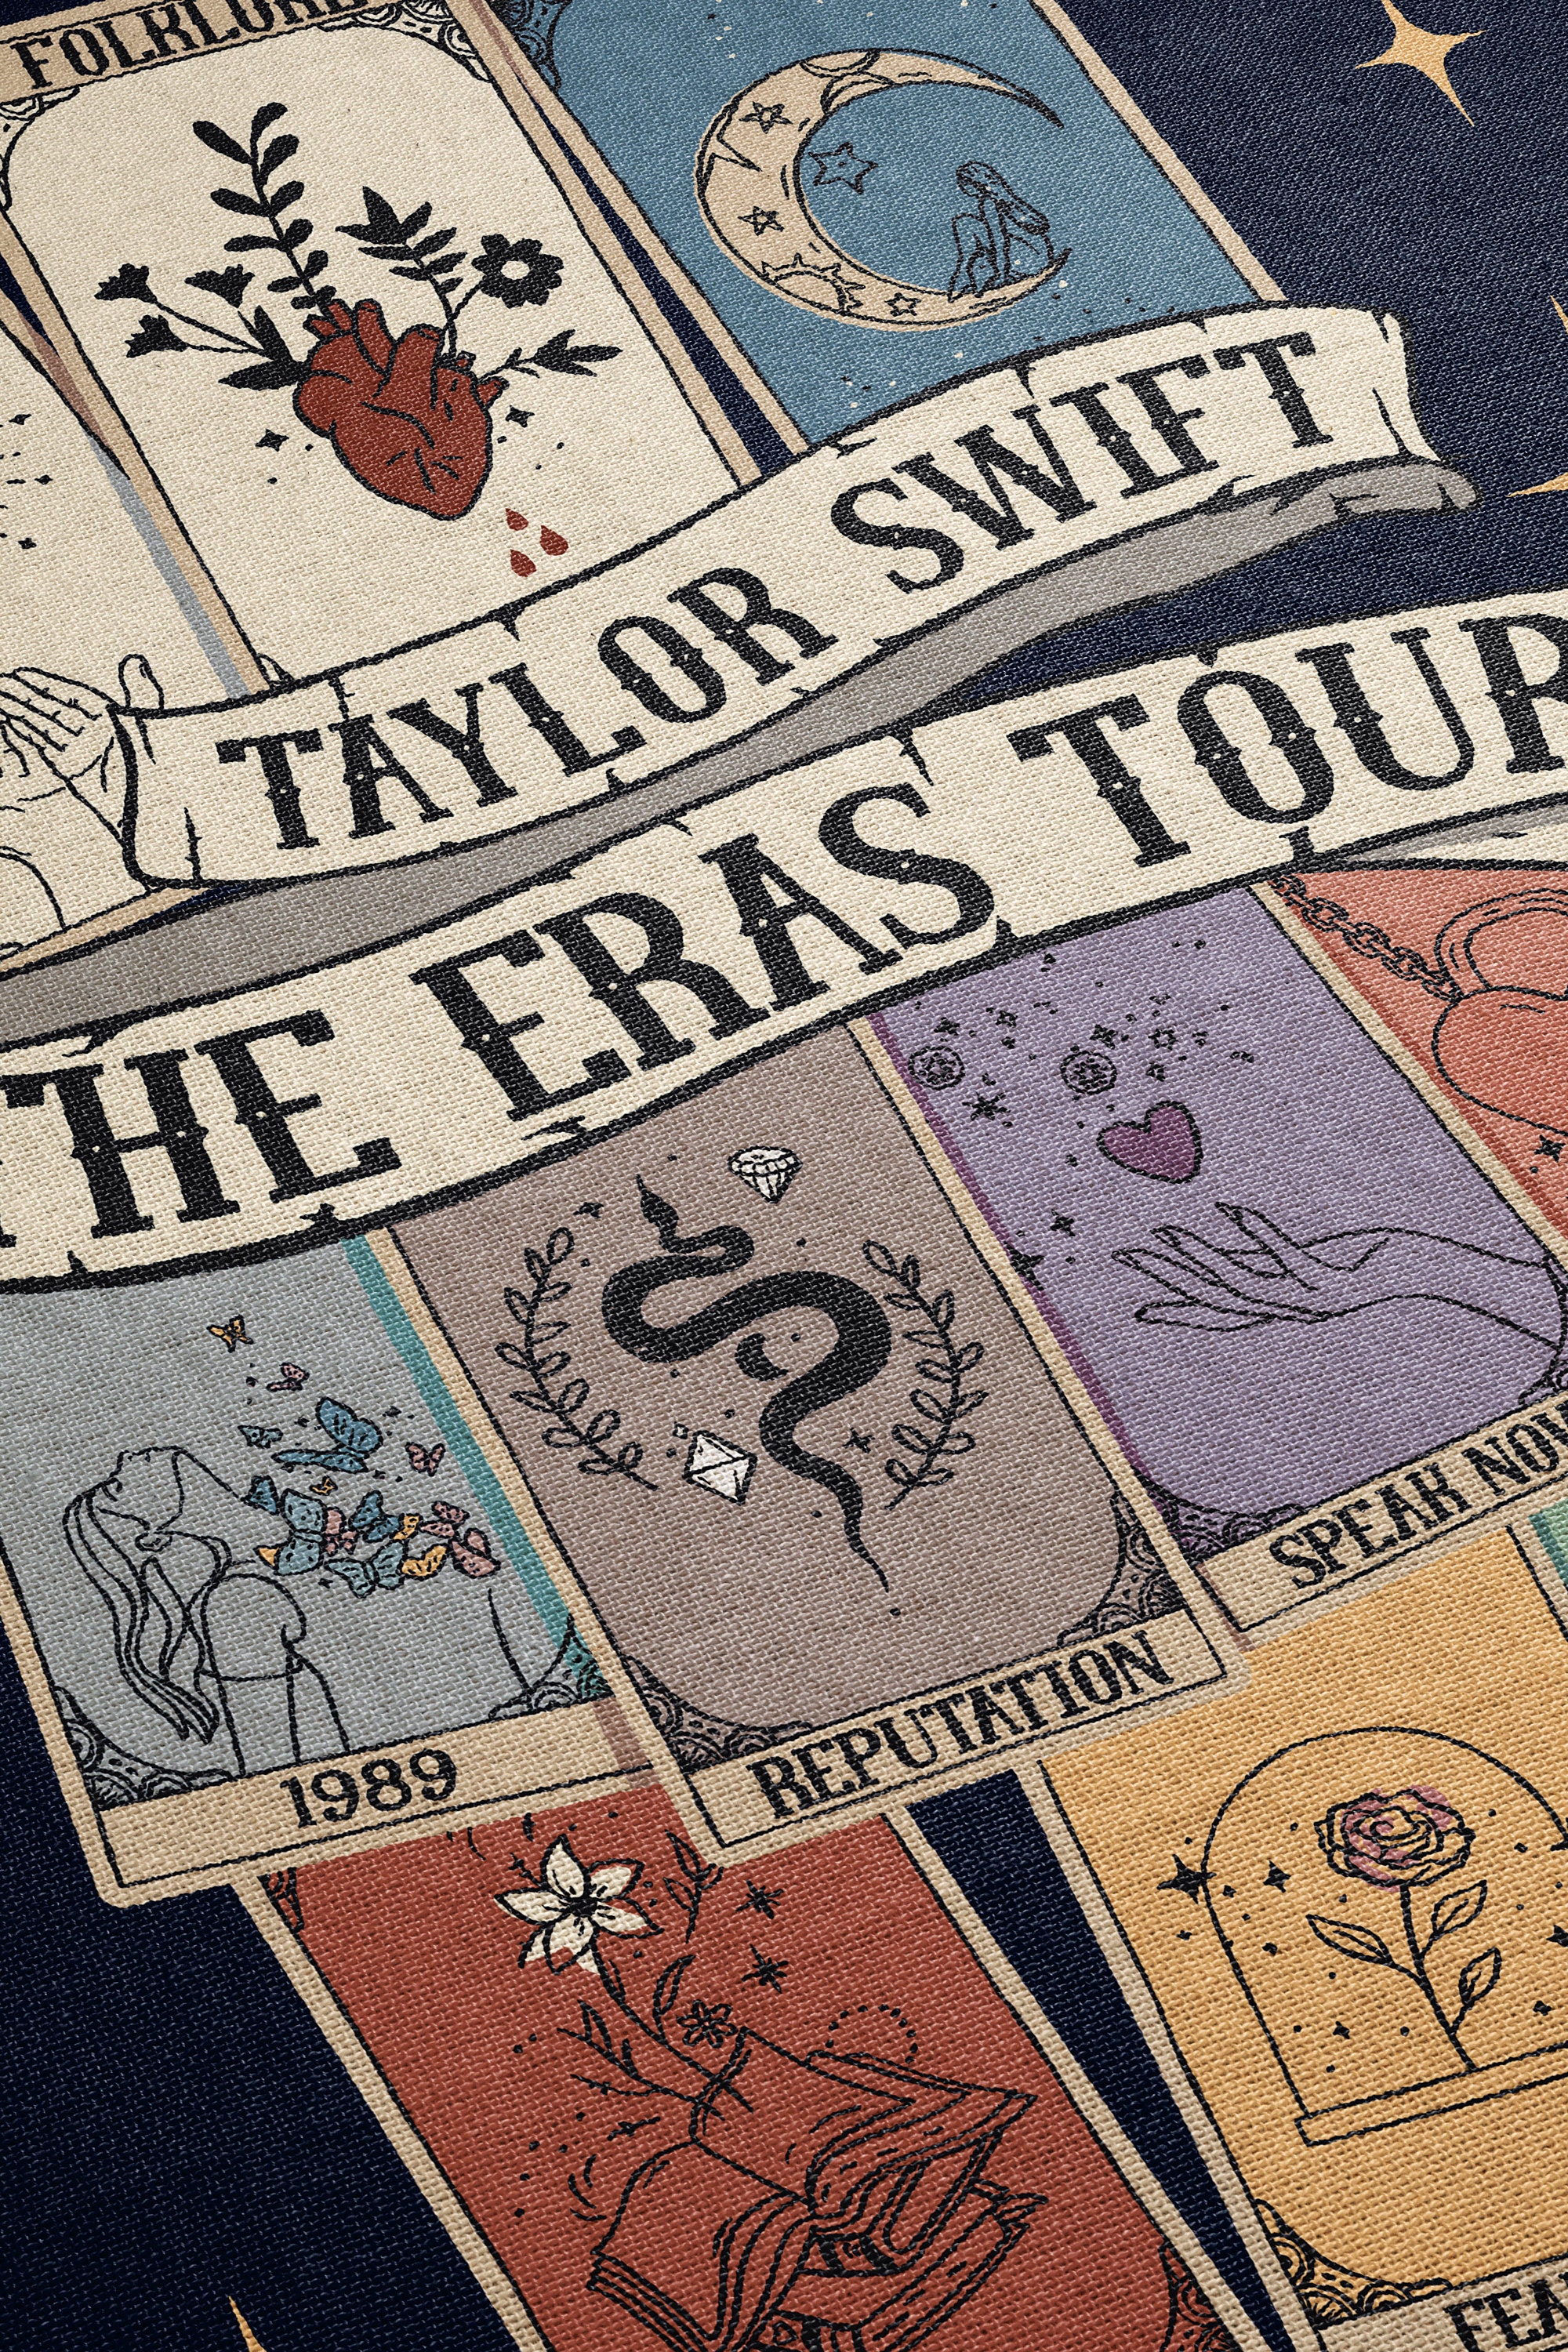 Discover Eras Tour Hand Woven Blanket | taylor version Tapestry Throw | Christmas Gift